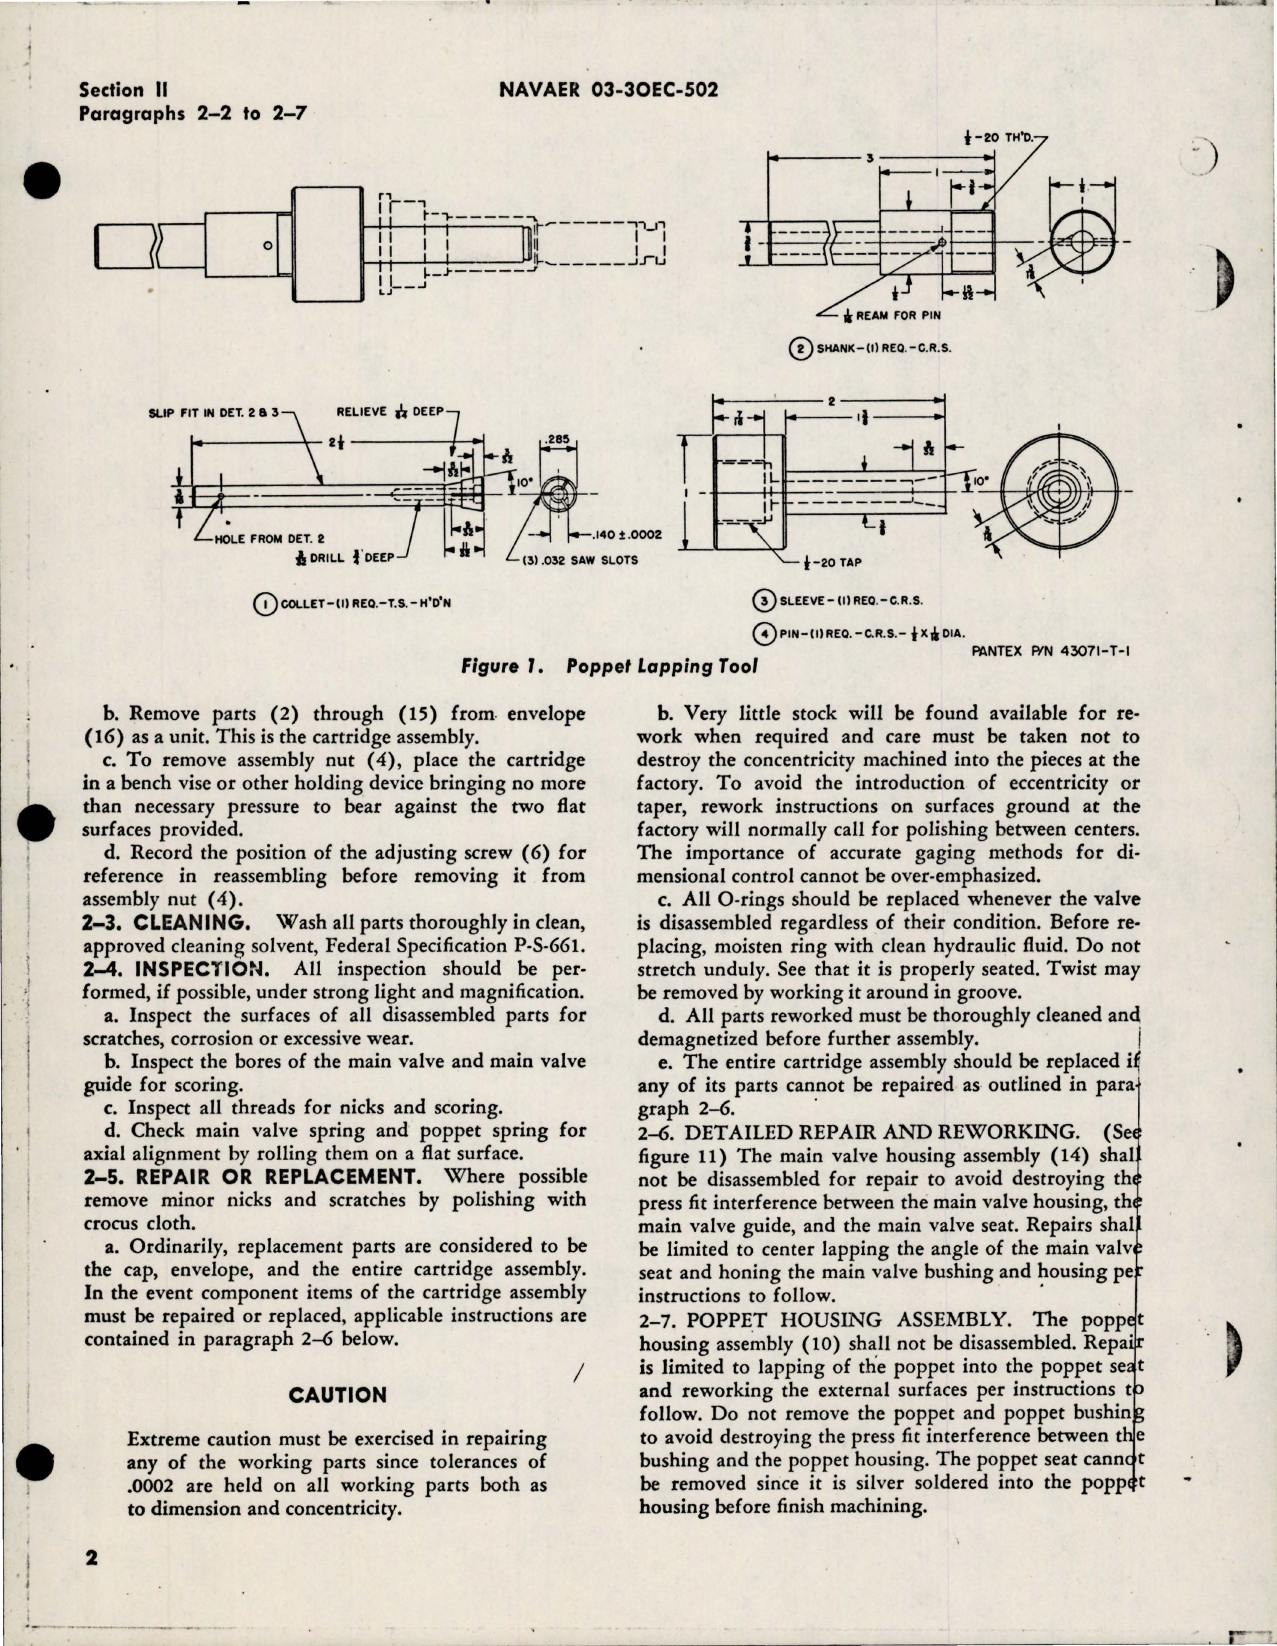 Sample page 5 from AirCorps Library document: Overhaul Instructions for Hydraulic Pressure Relief Valve